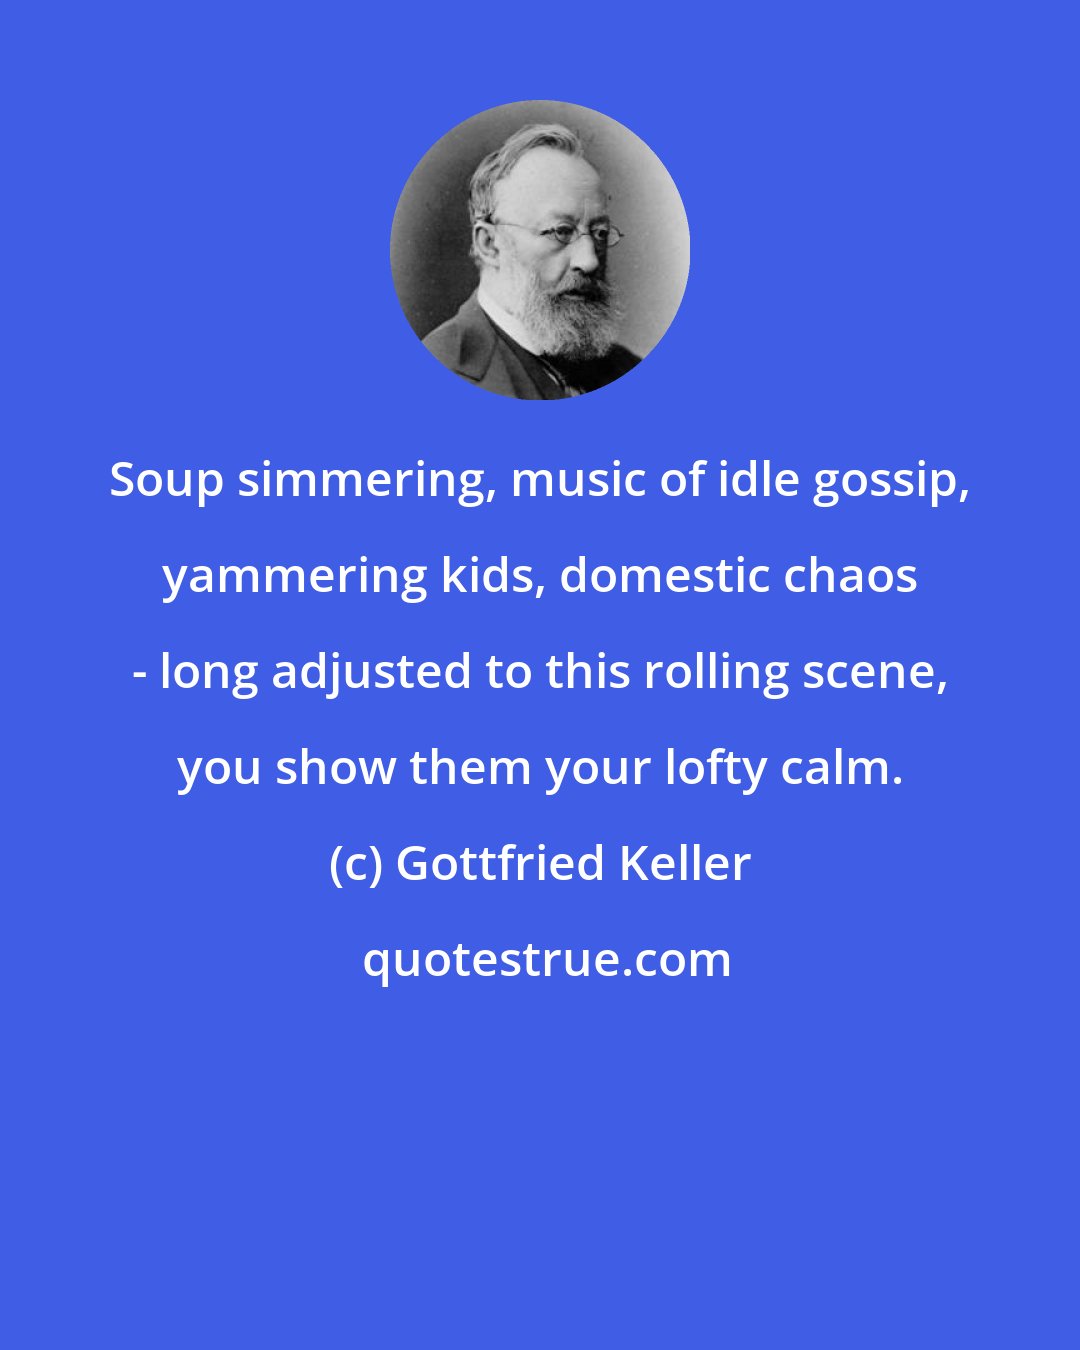 Gottfried Keller: Soup simmering, music of idle gossip, yammering kids, domestic chaos - long adjusted to this rolling scene, you show them your lofty calm.